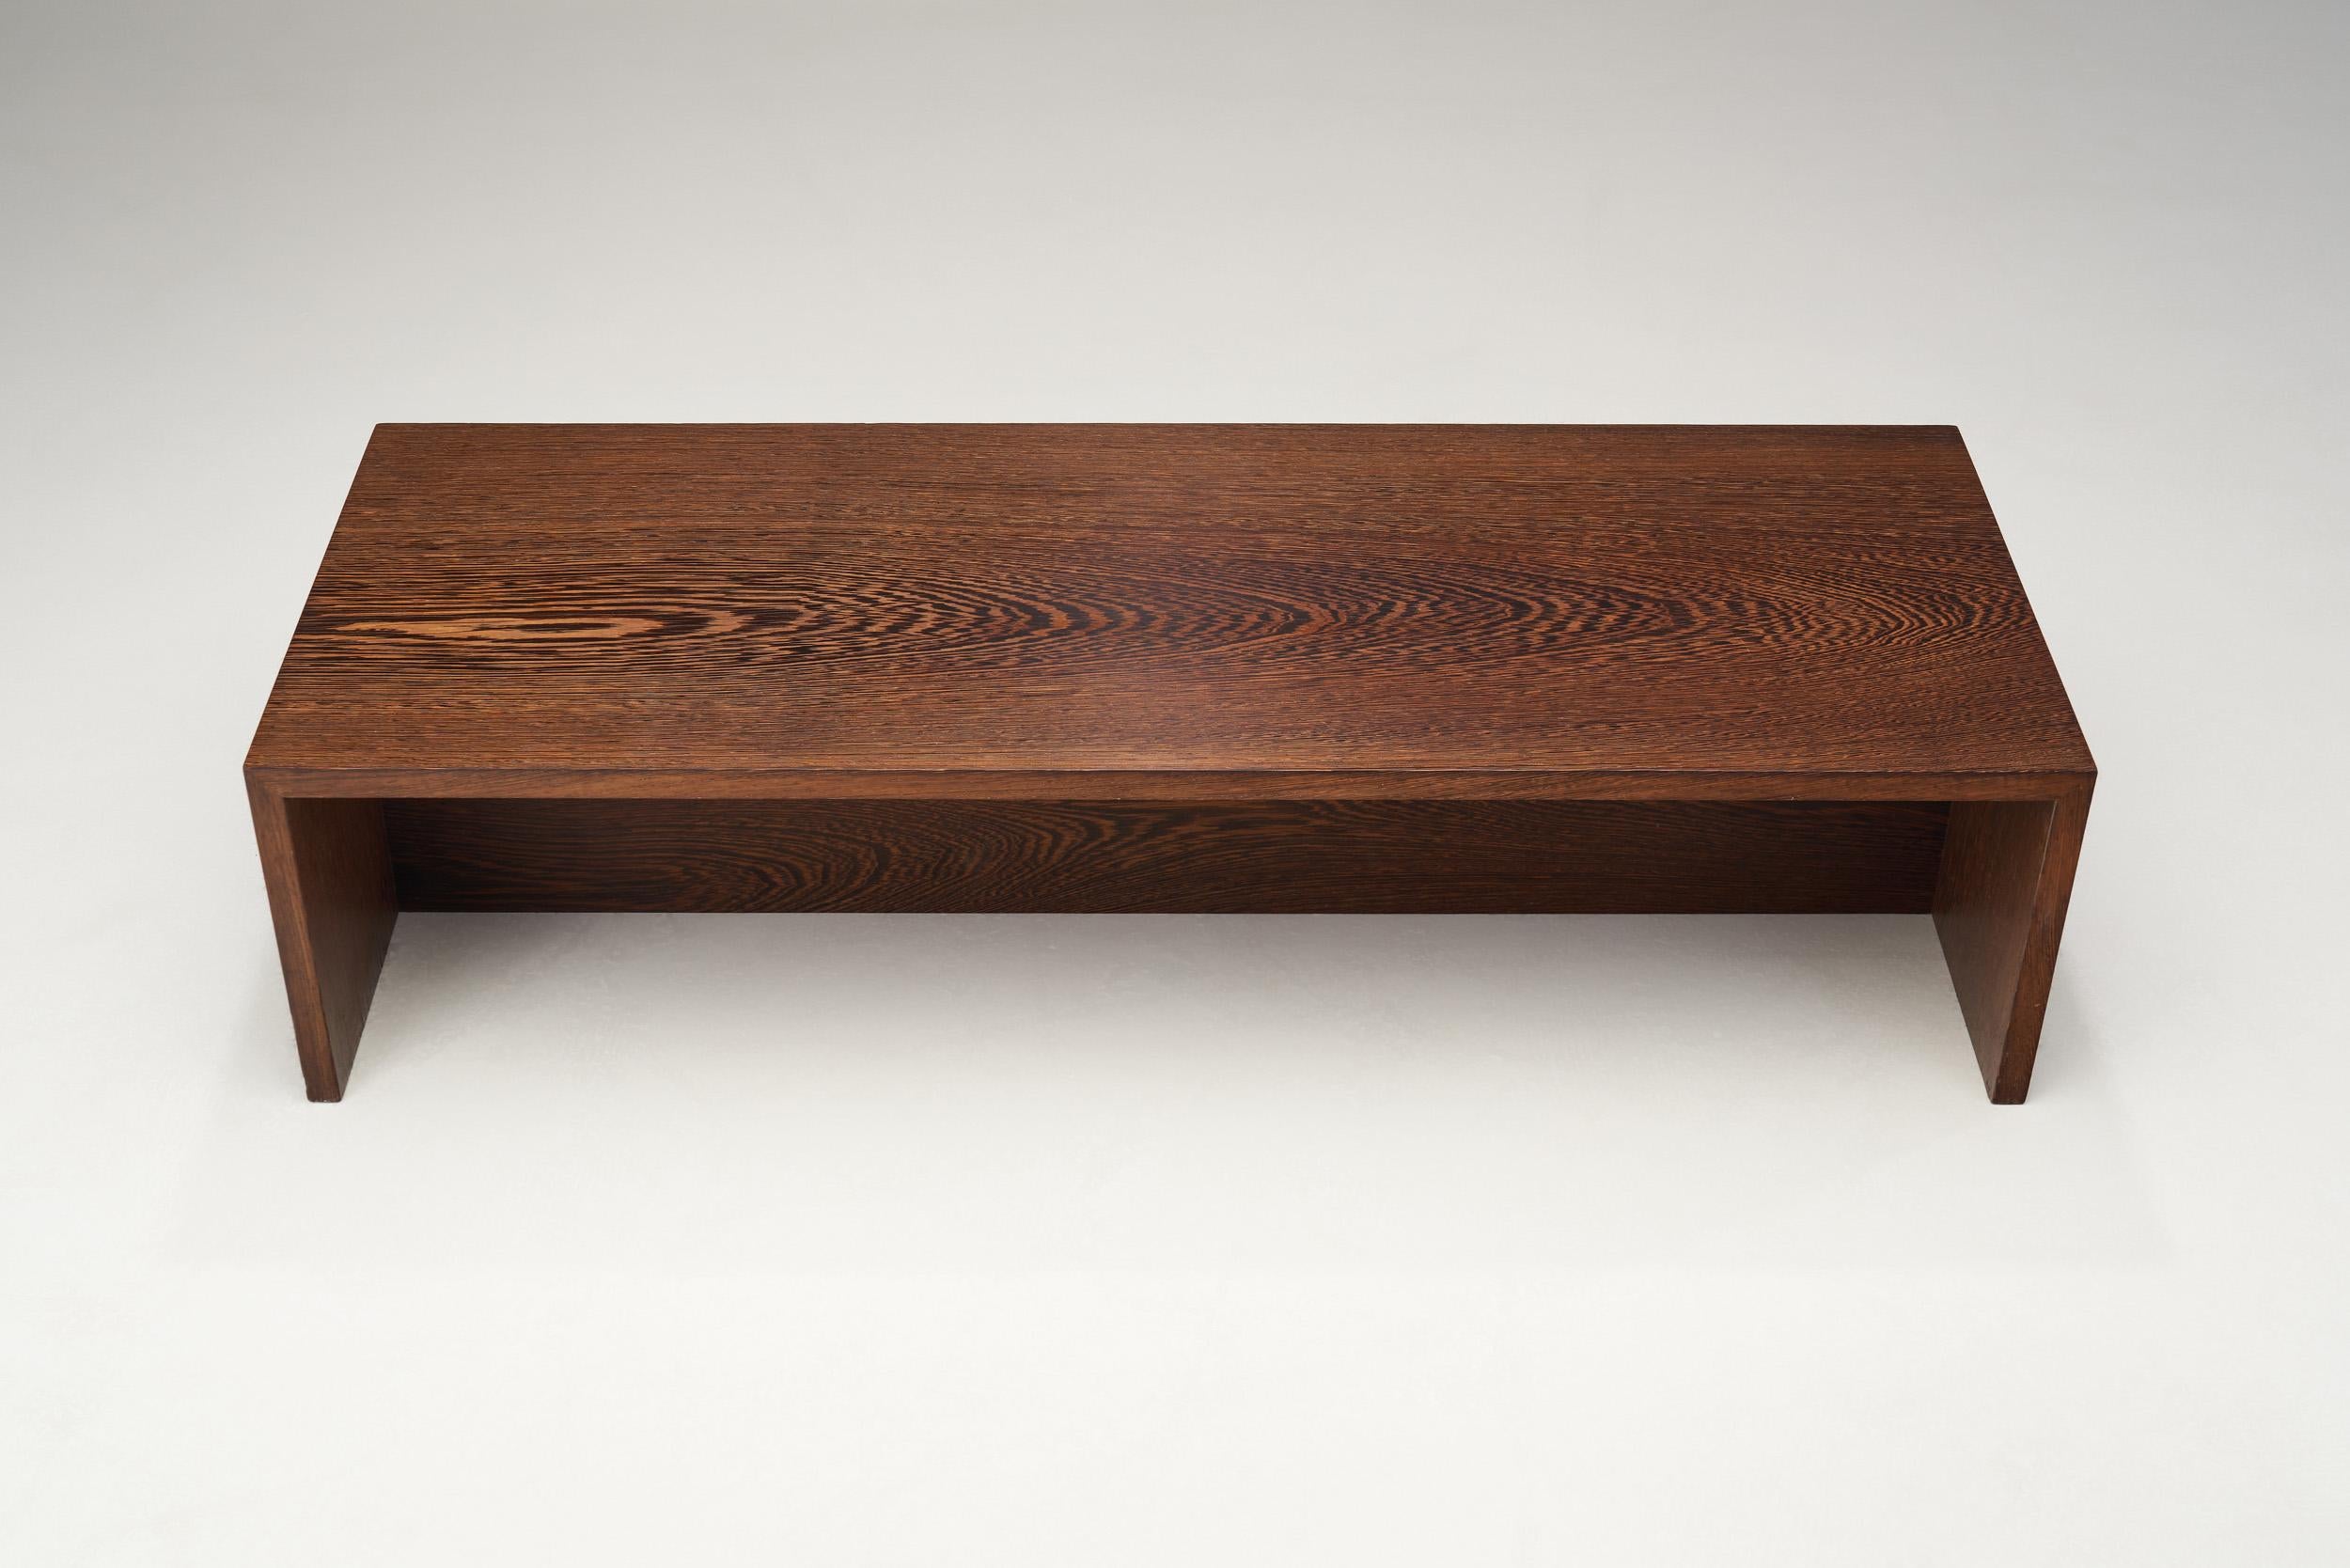 Minimalist Dutch Wenge Benches, Netherlands, Ca 1970s For Sale 1